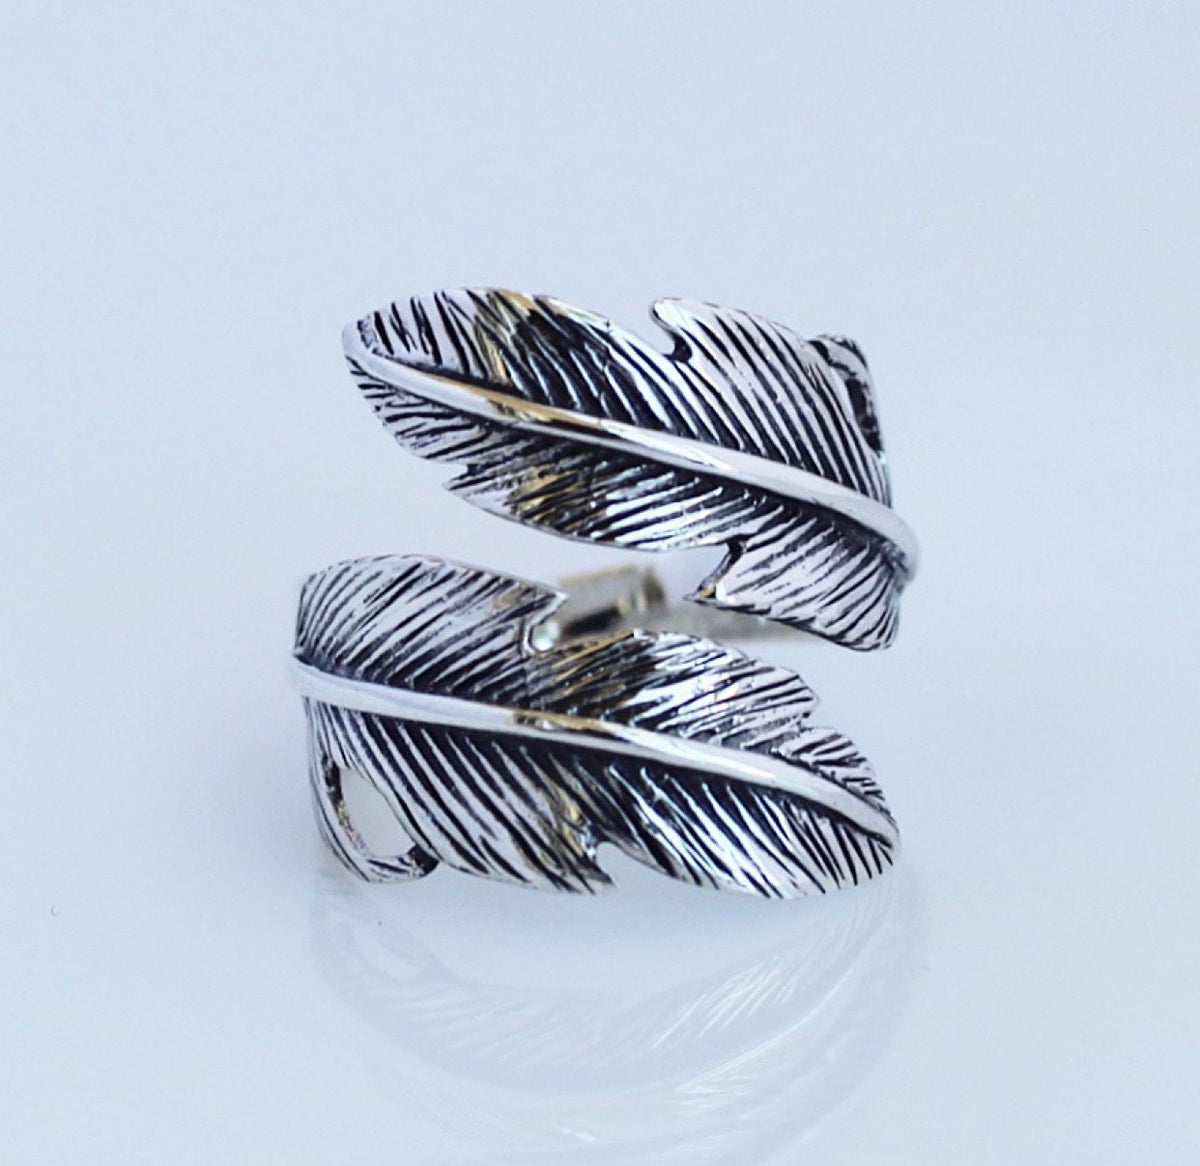 rings, silver rings, adjustable rings, 925 silver rings, feather rings, fashion. jewelry, statement jewelry, long rings, long silver rings, ring with a leaf, ring for men, rings for women, trending jewelry, fashion jewelry, statement jewelry, statement rings, gift ideas, rings for the middle finger, nice jewelry, ring for the middle finger, accessories, silver accessories, nice rings, designer rings, kesley jewelry, kelsey,  feather ring